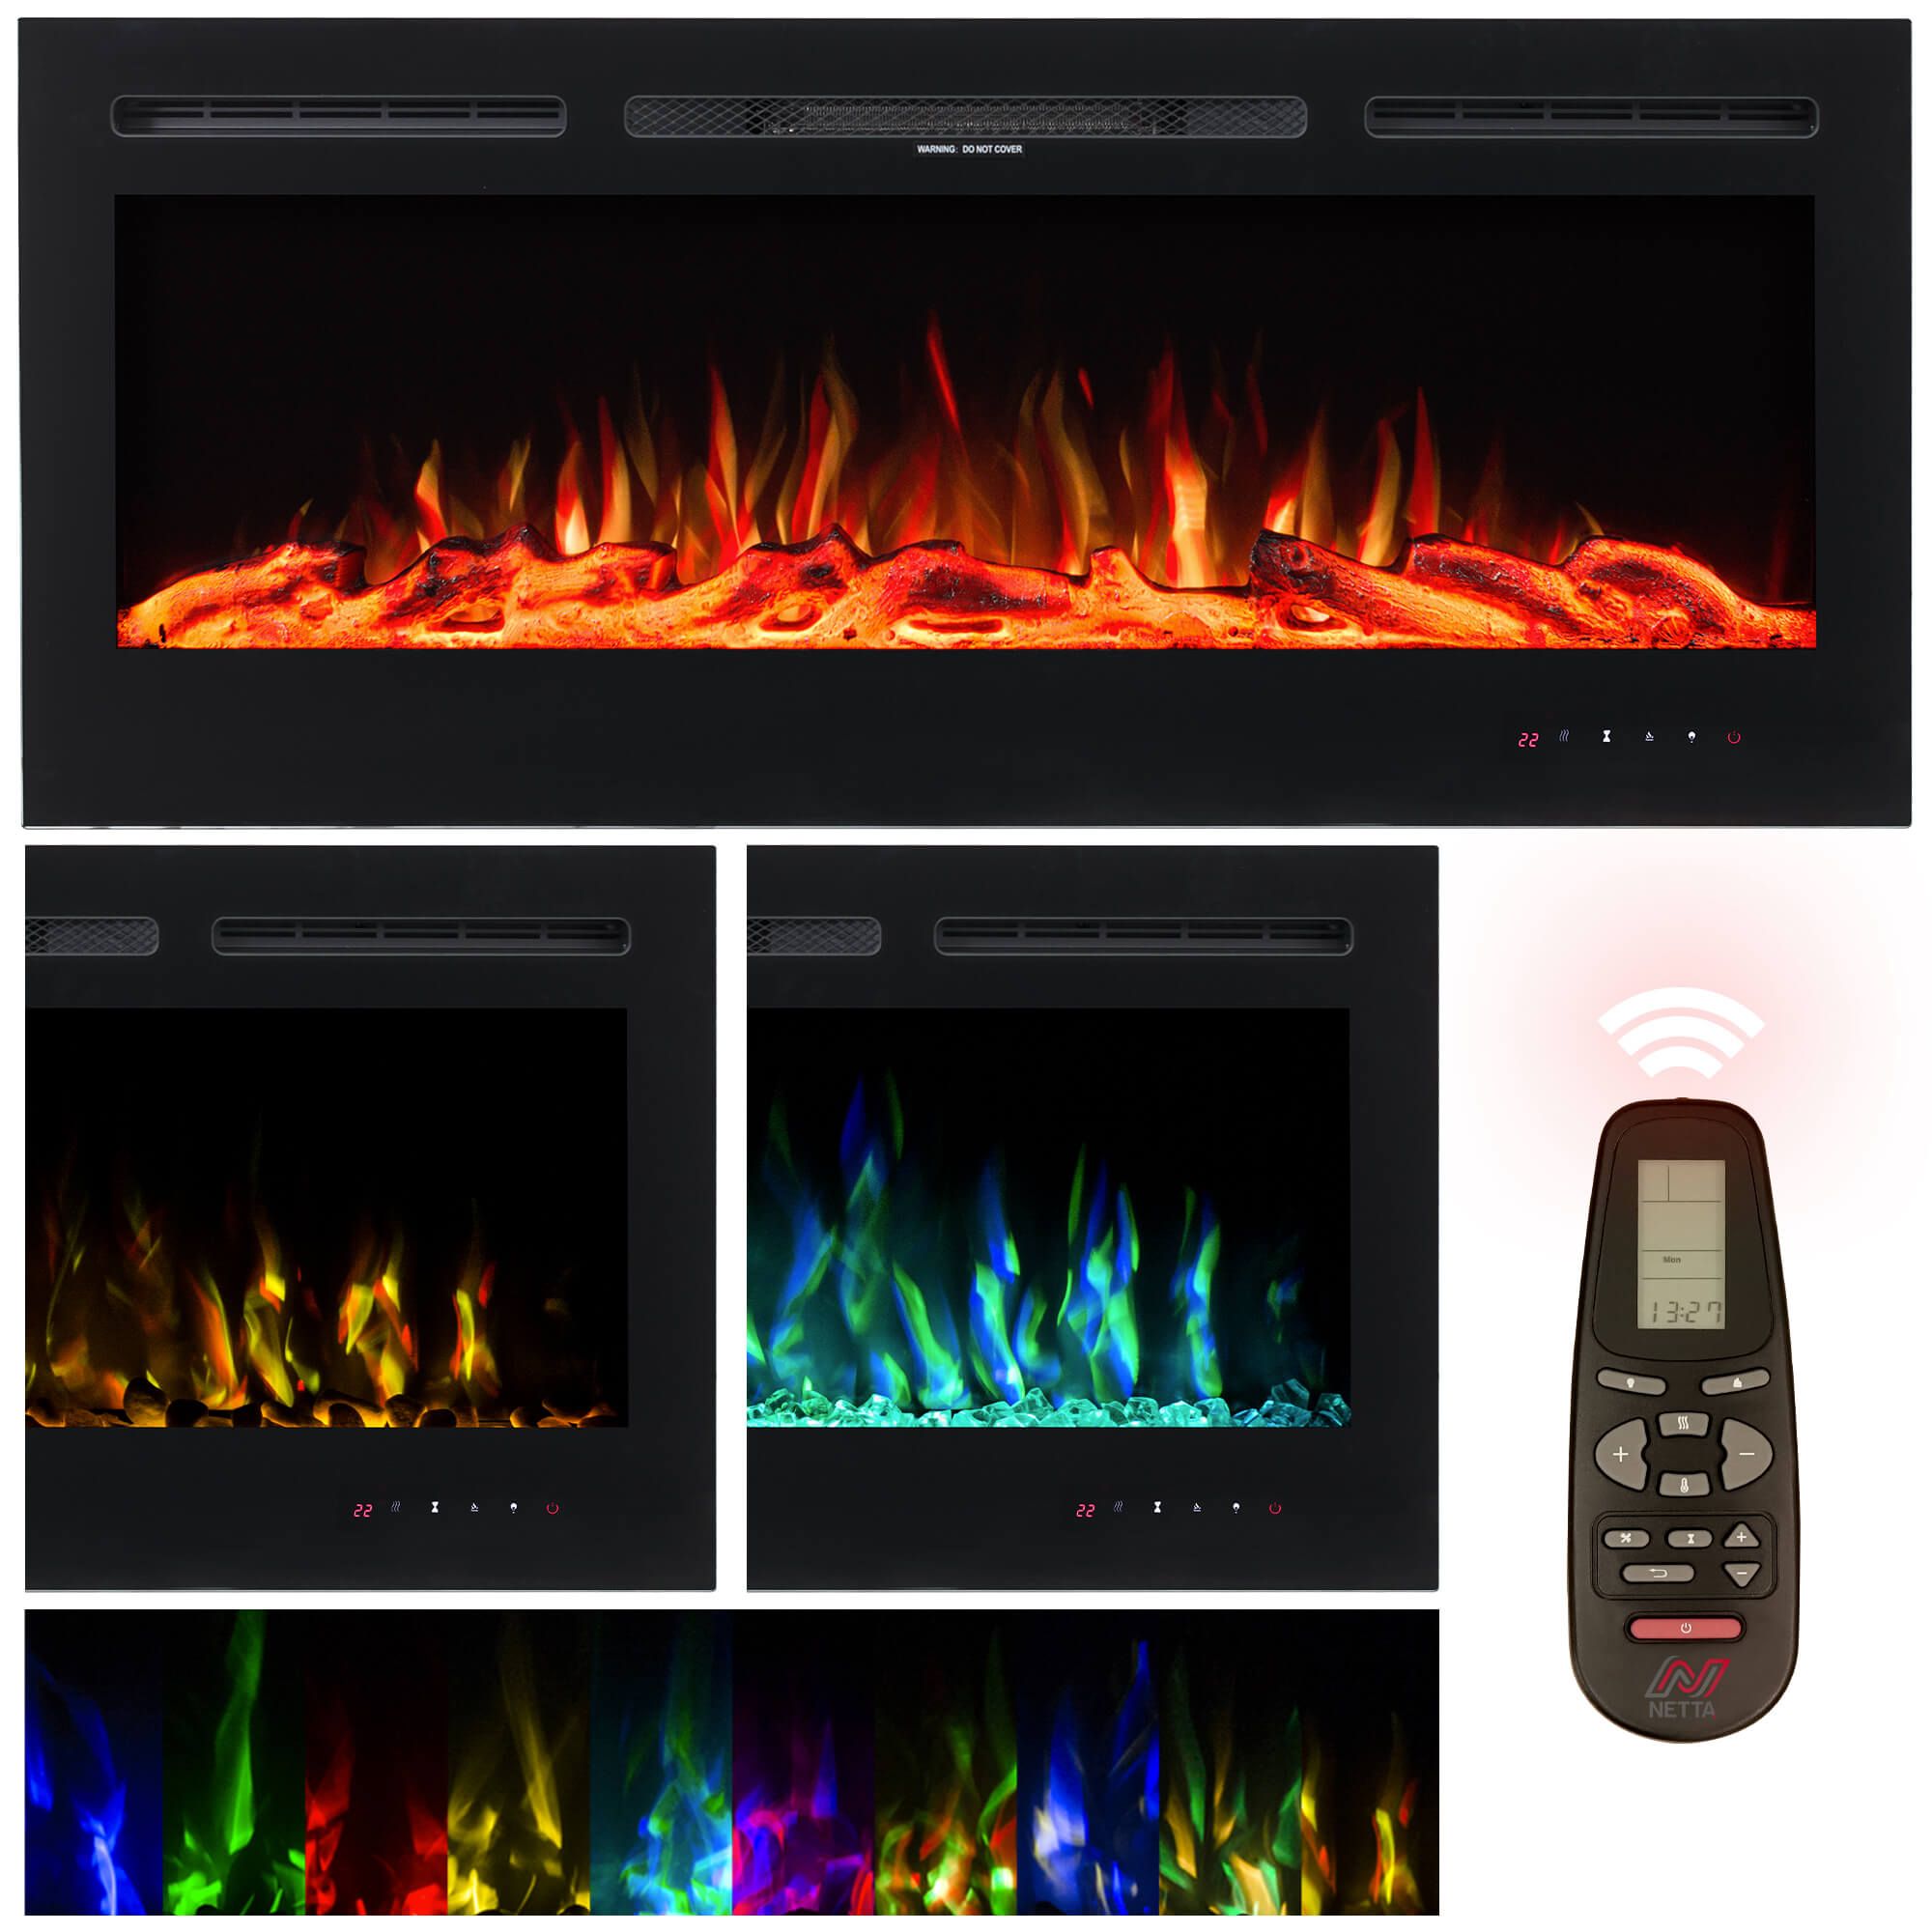 NETTA 50" Glass Panel Electric Fireplace with Colourful Flame effect